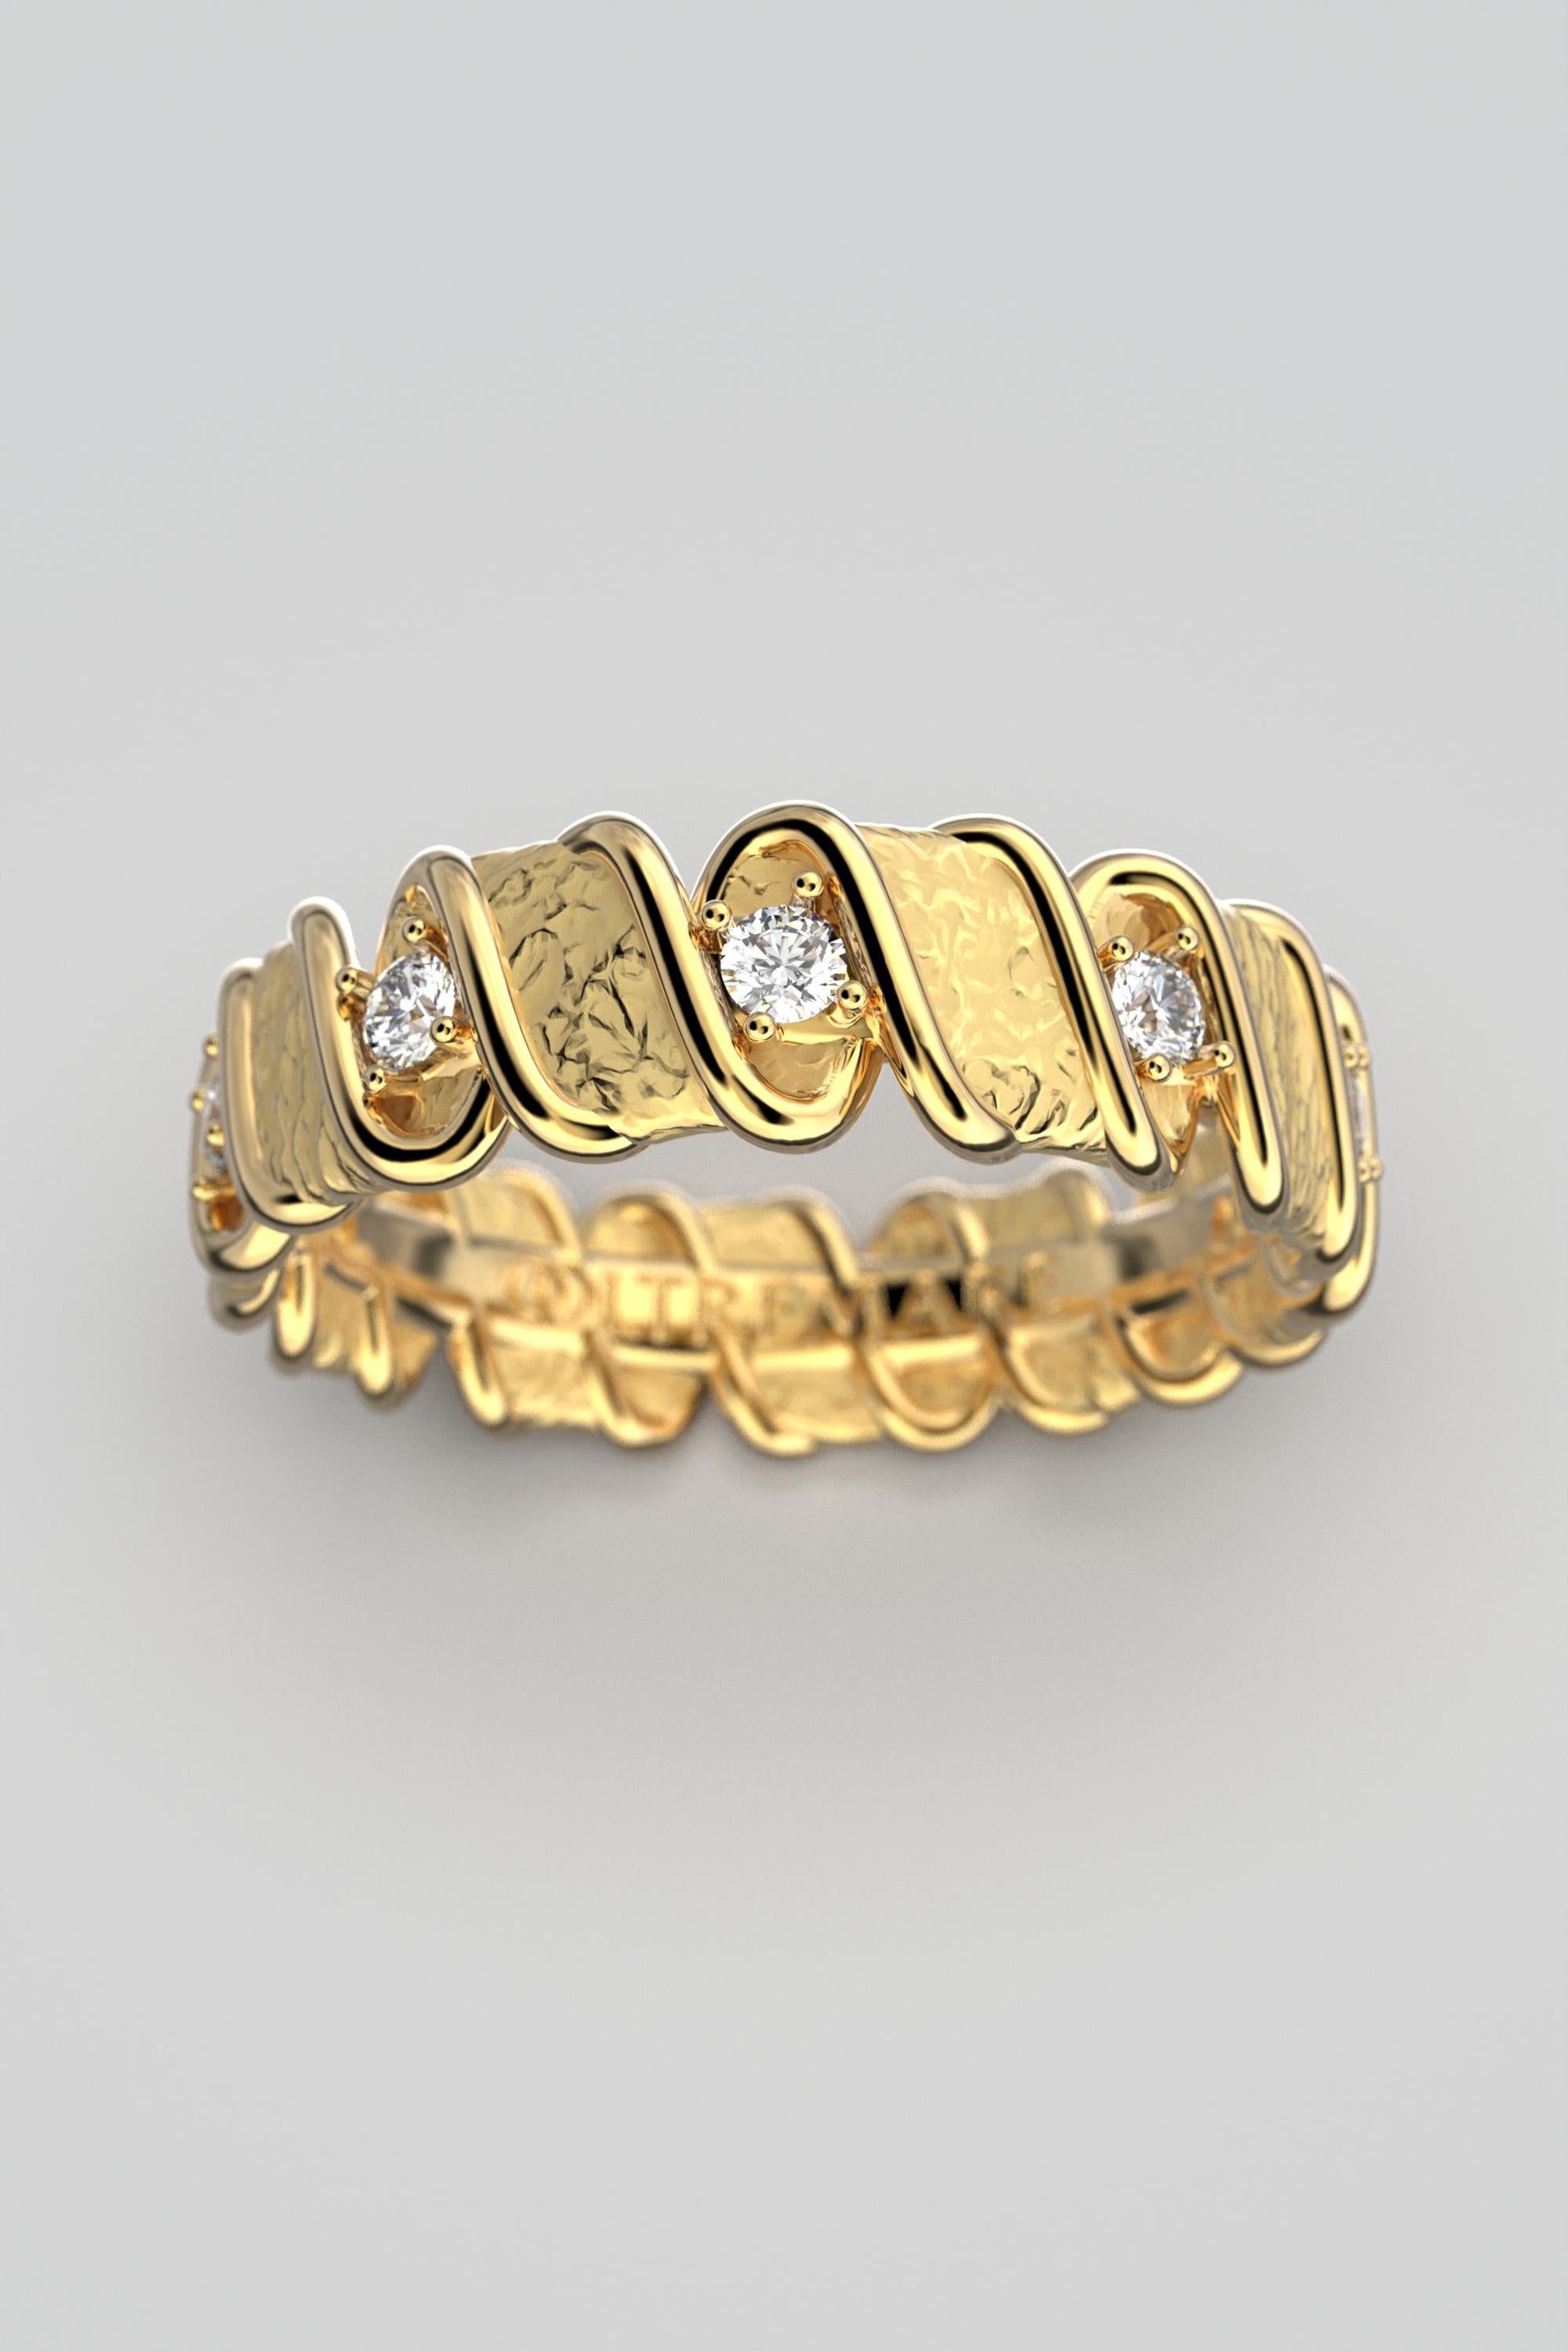 For Sale:  Italian Diamond Eternity Gold Band Made in Italy in 18k By Oltremare Gioielli 10